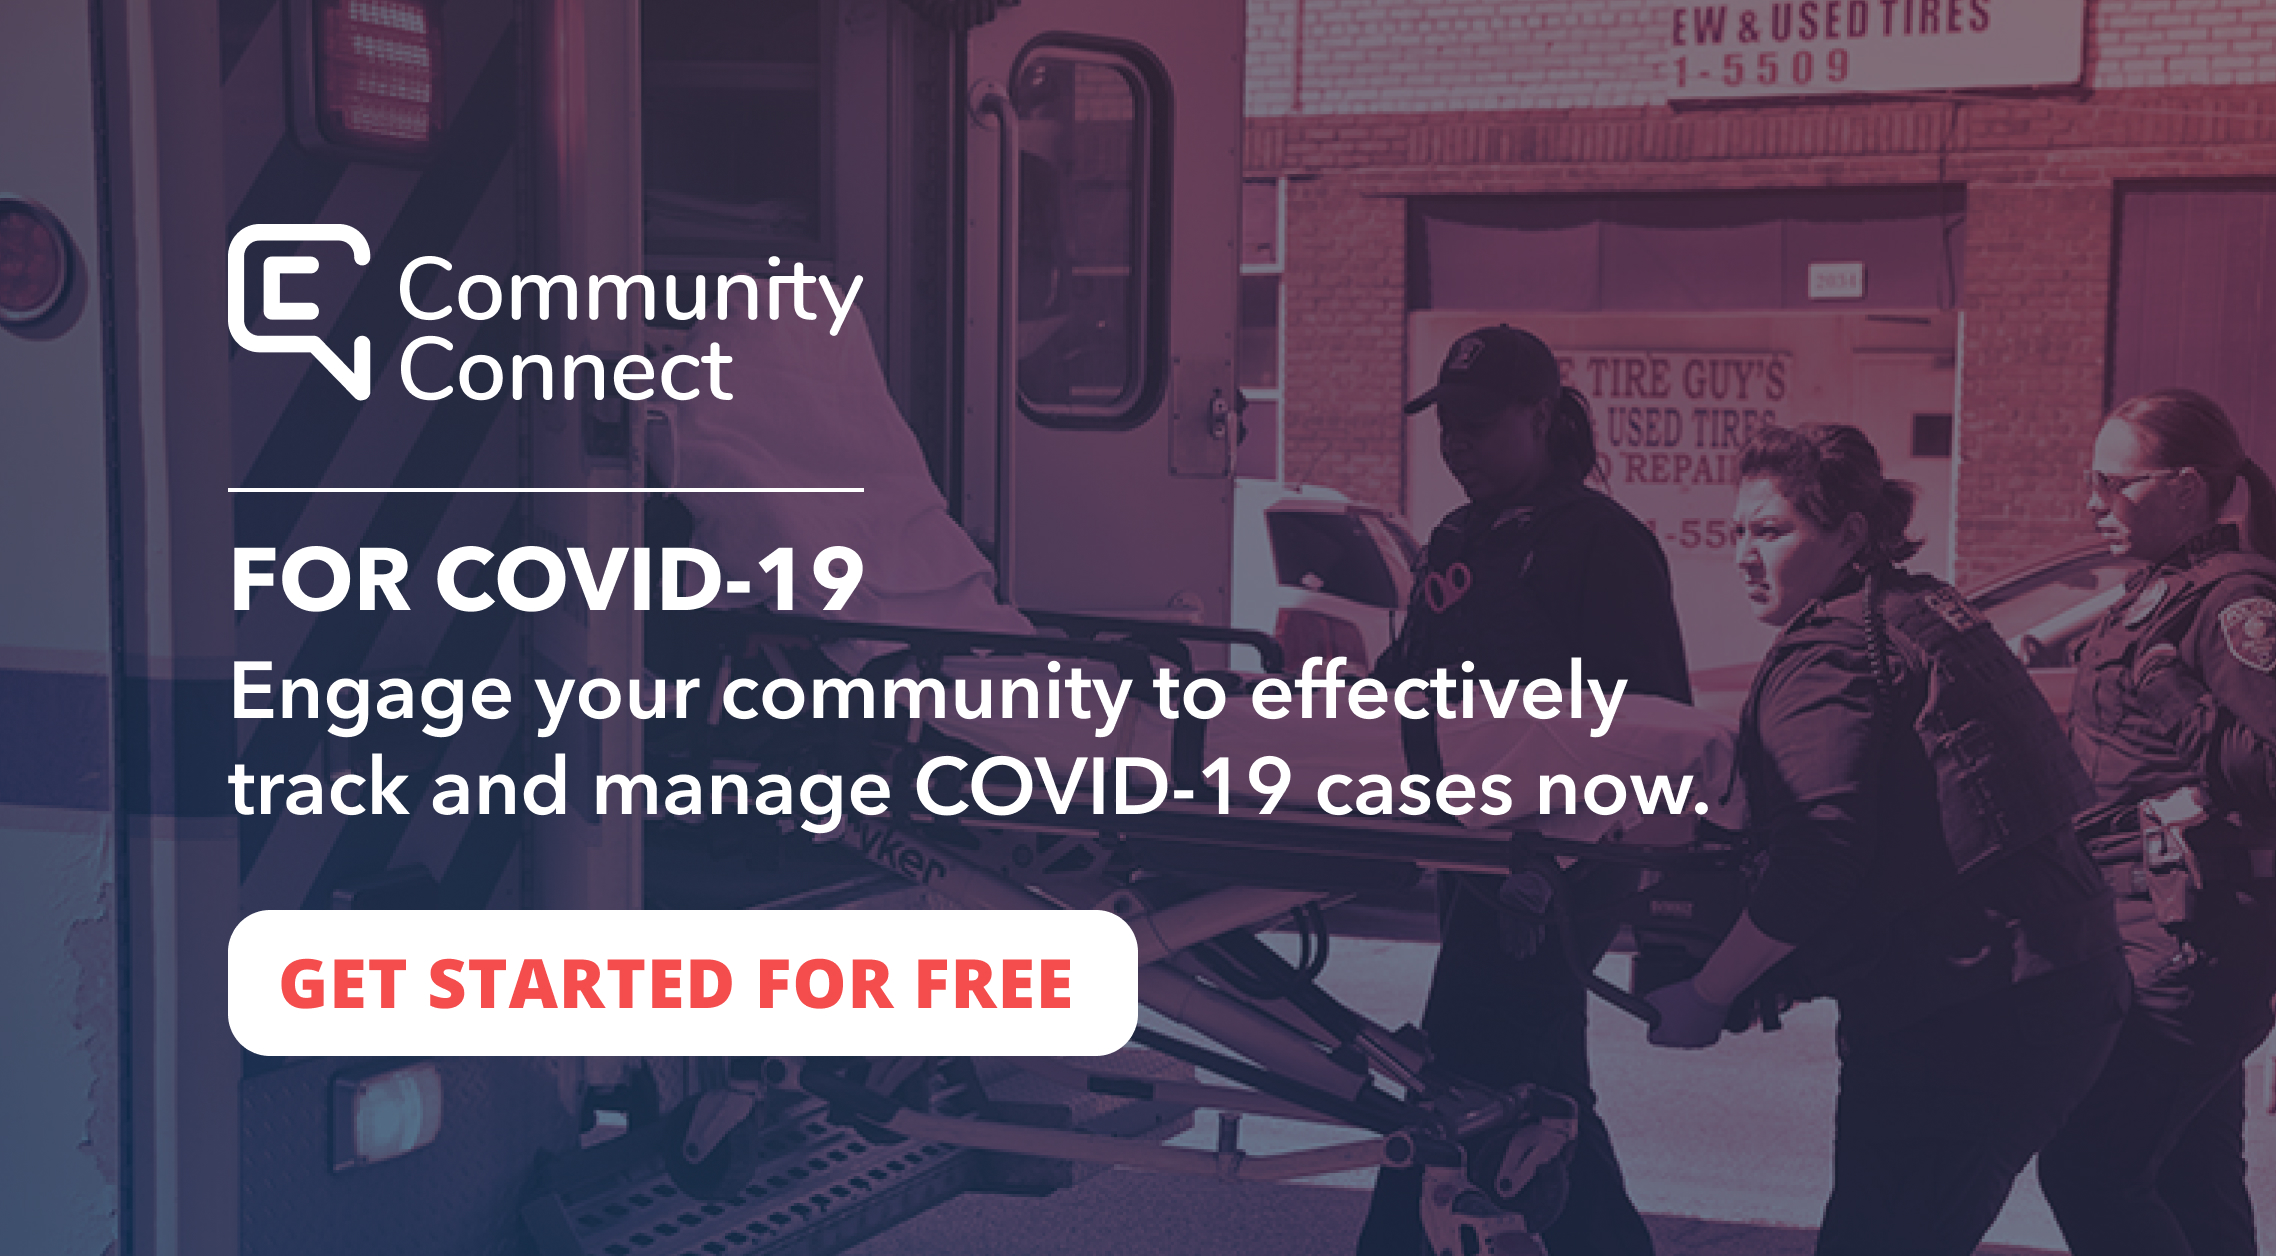 Community Connect enables residents to self-report COVID-19 and high-risk occupant information in minutes - shared directly with Emergency Services for a more prepared response.